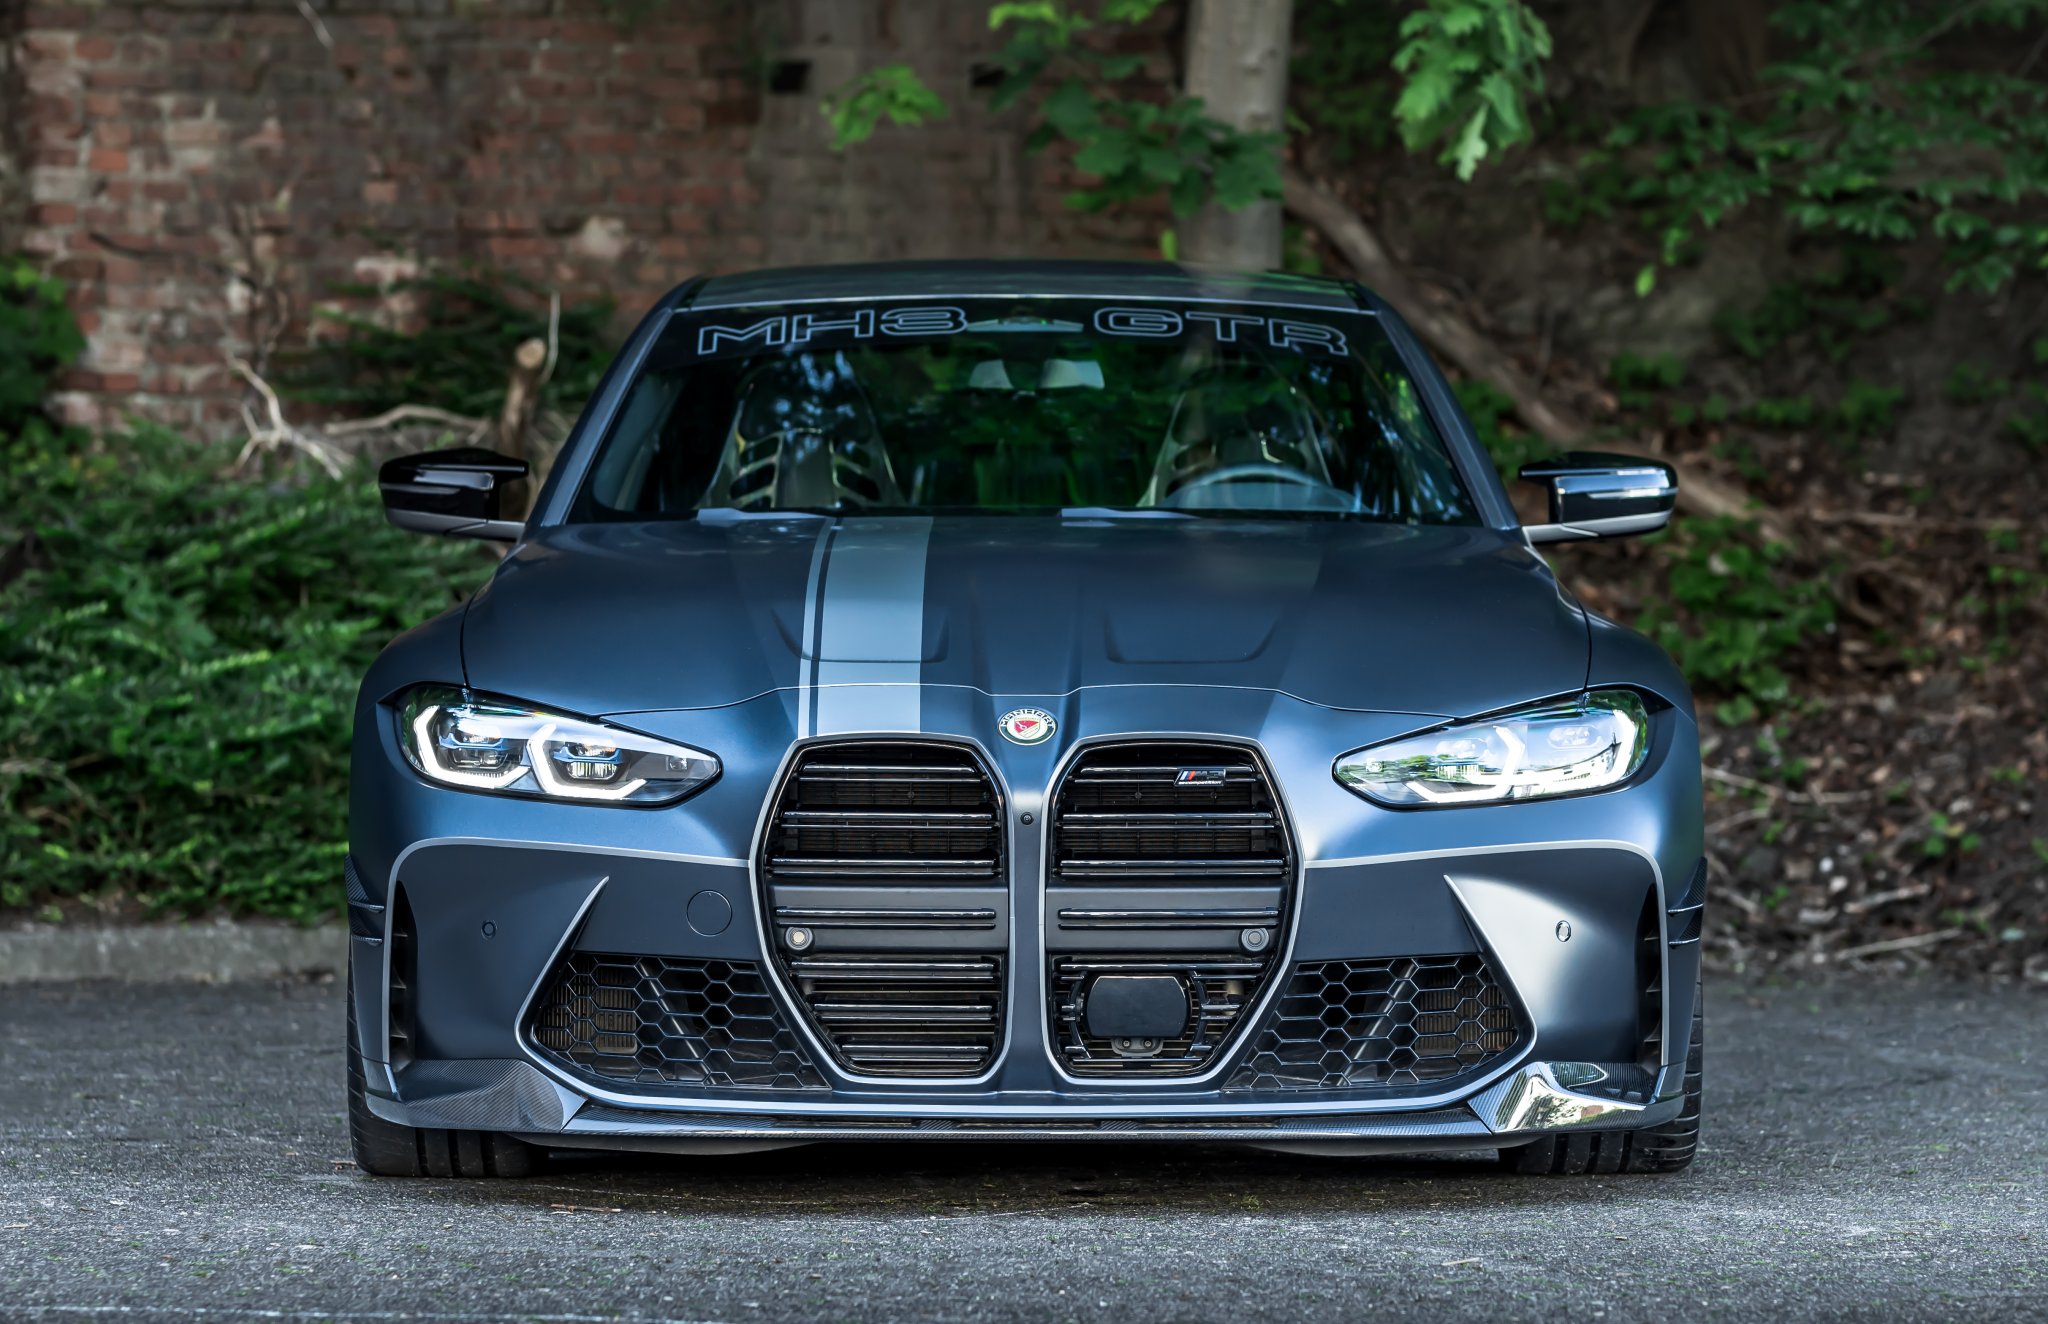 Check our price and buy an Manhart carbon fiber body kit for BMW M3 G80 GTR!